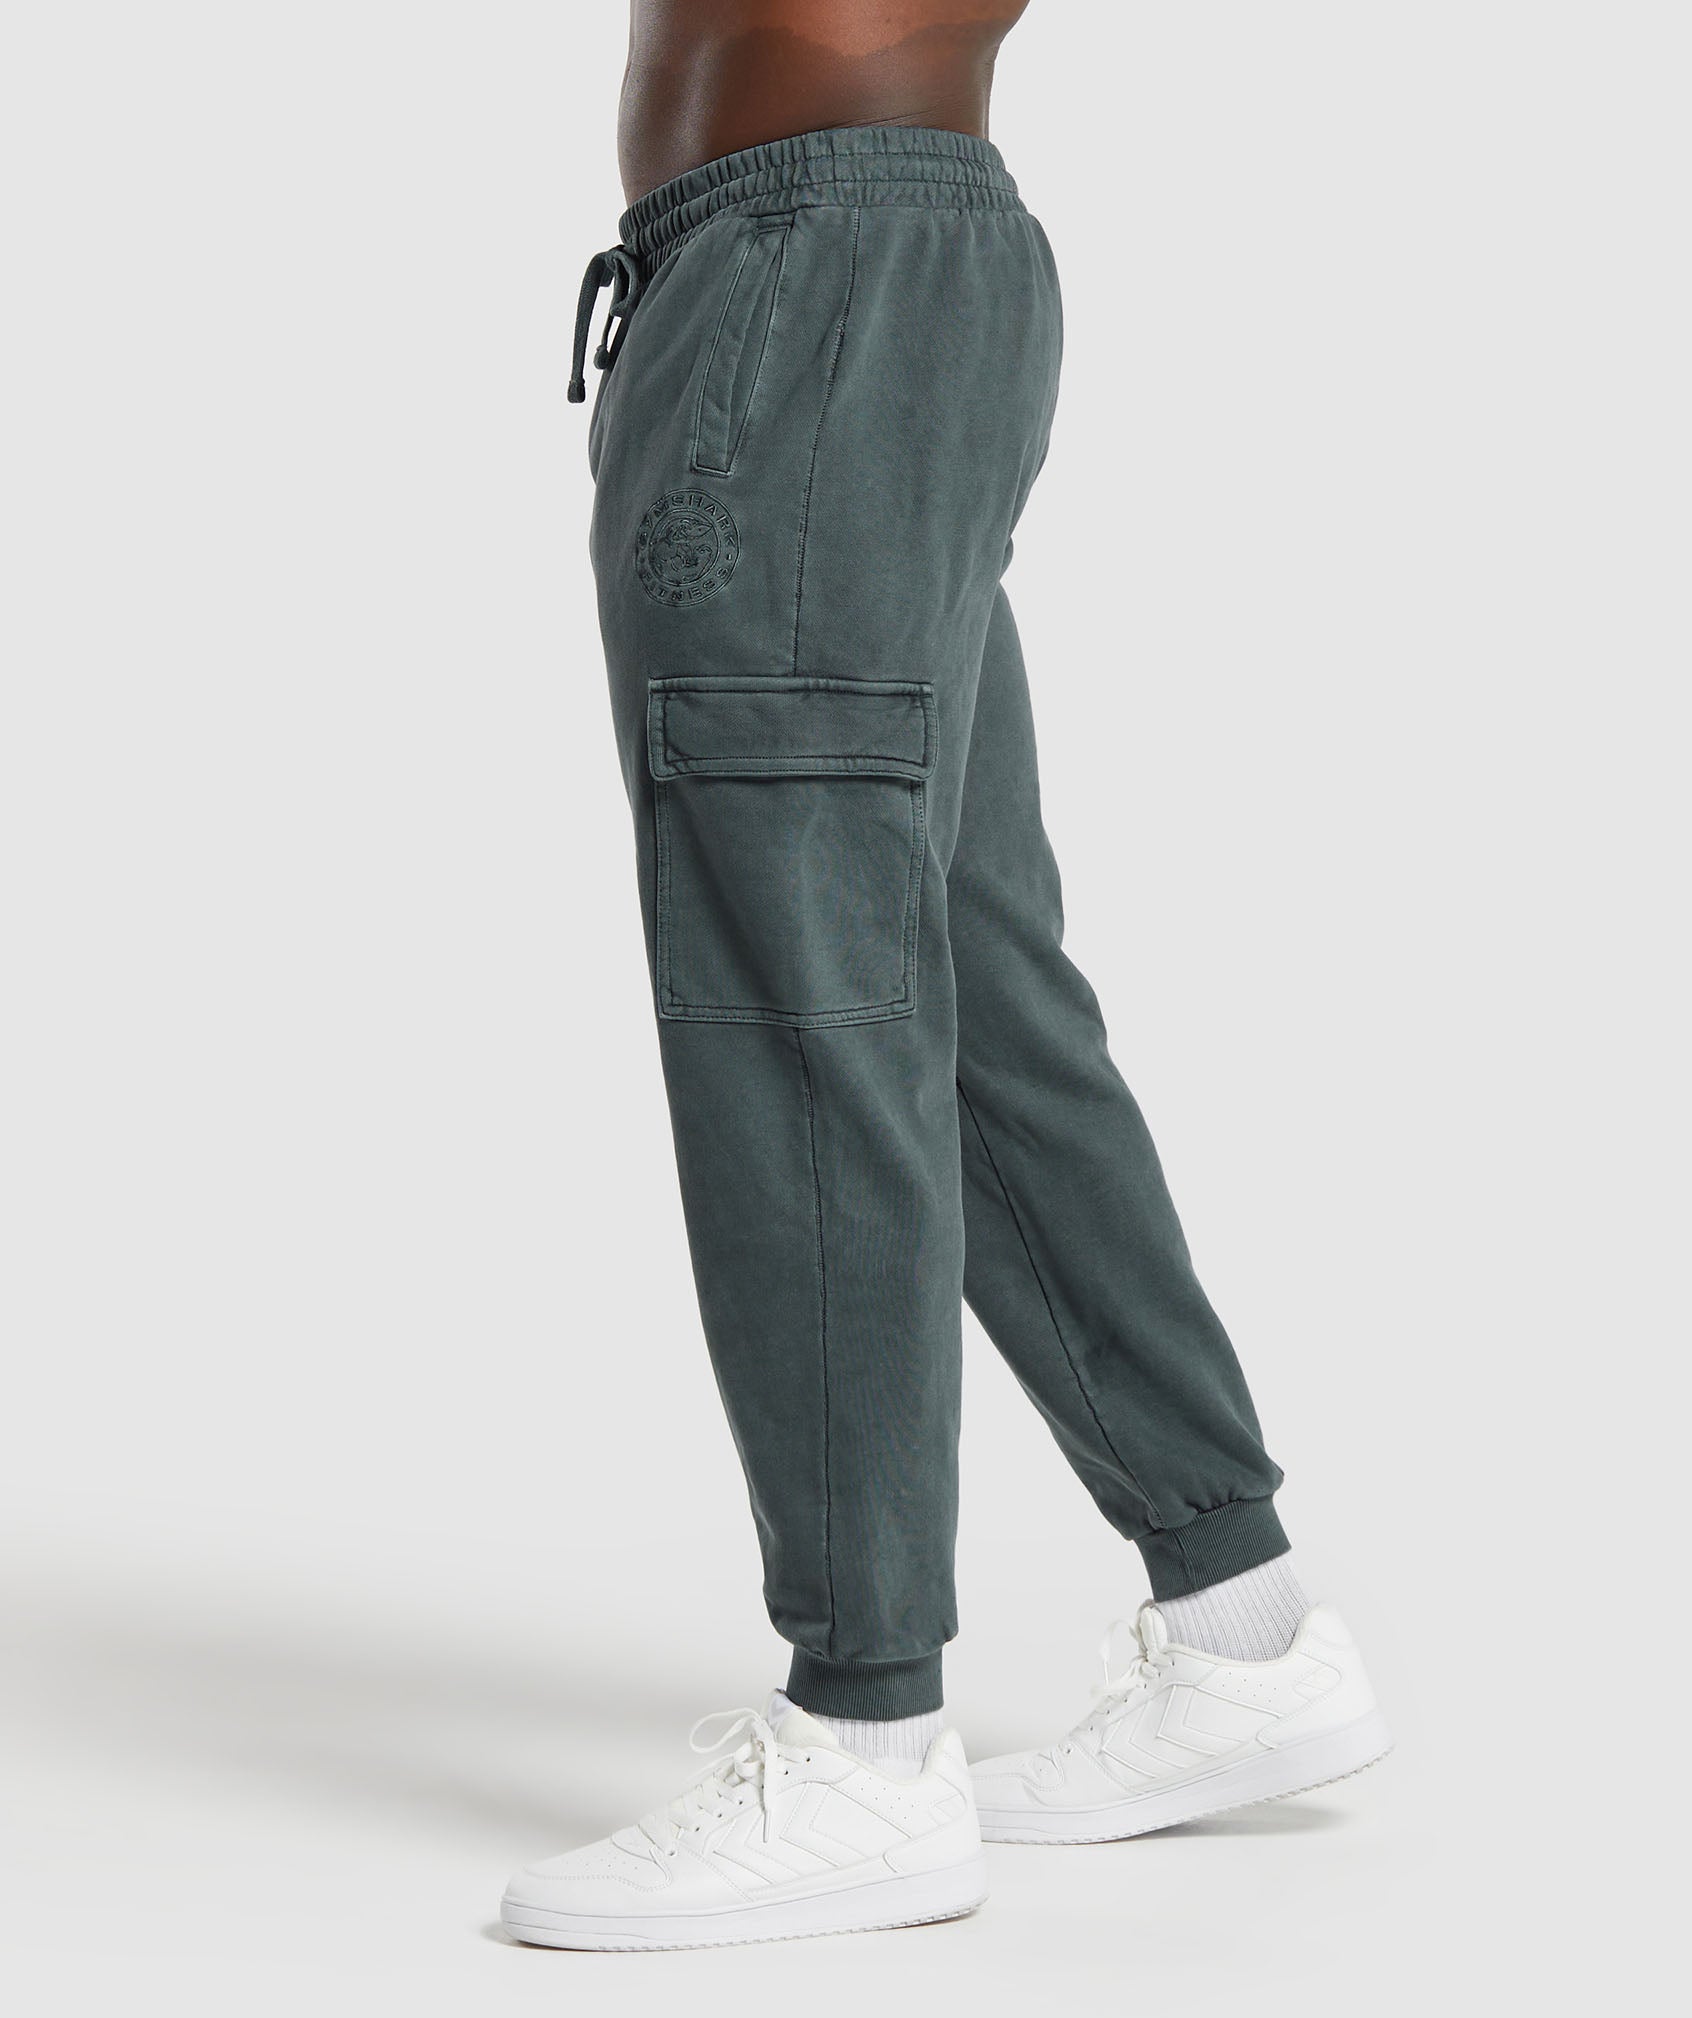 Premium Legacy Cargo Pants in Cargo Teal - view 3